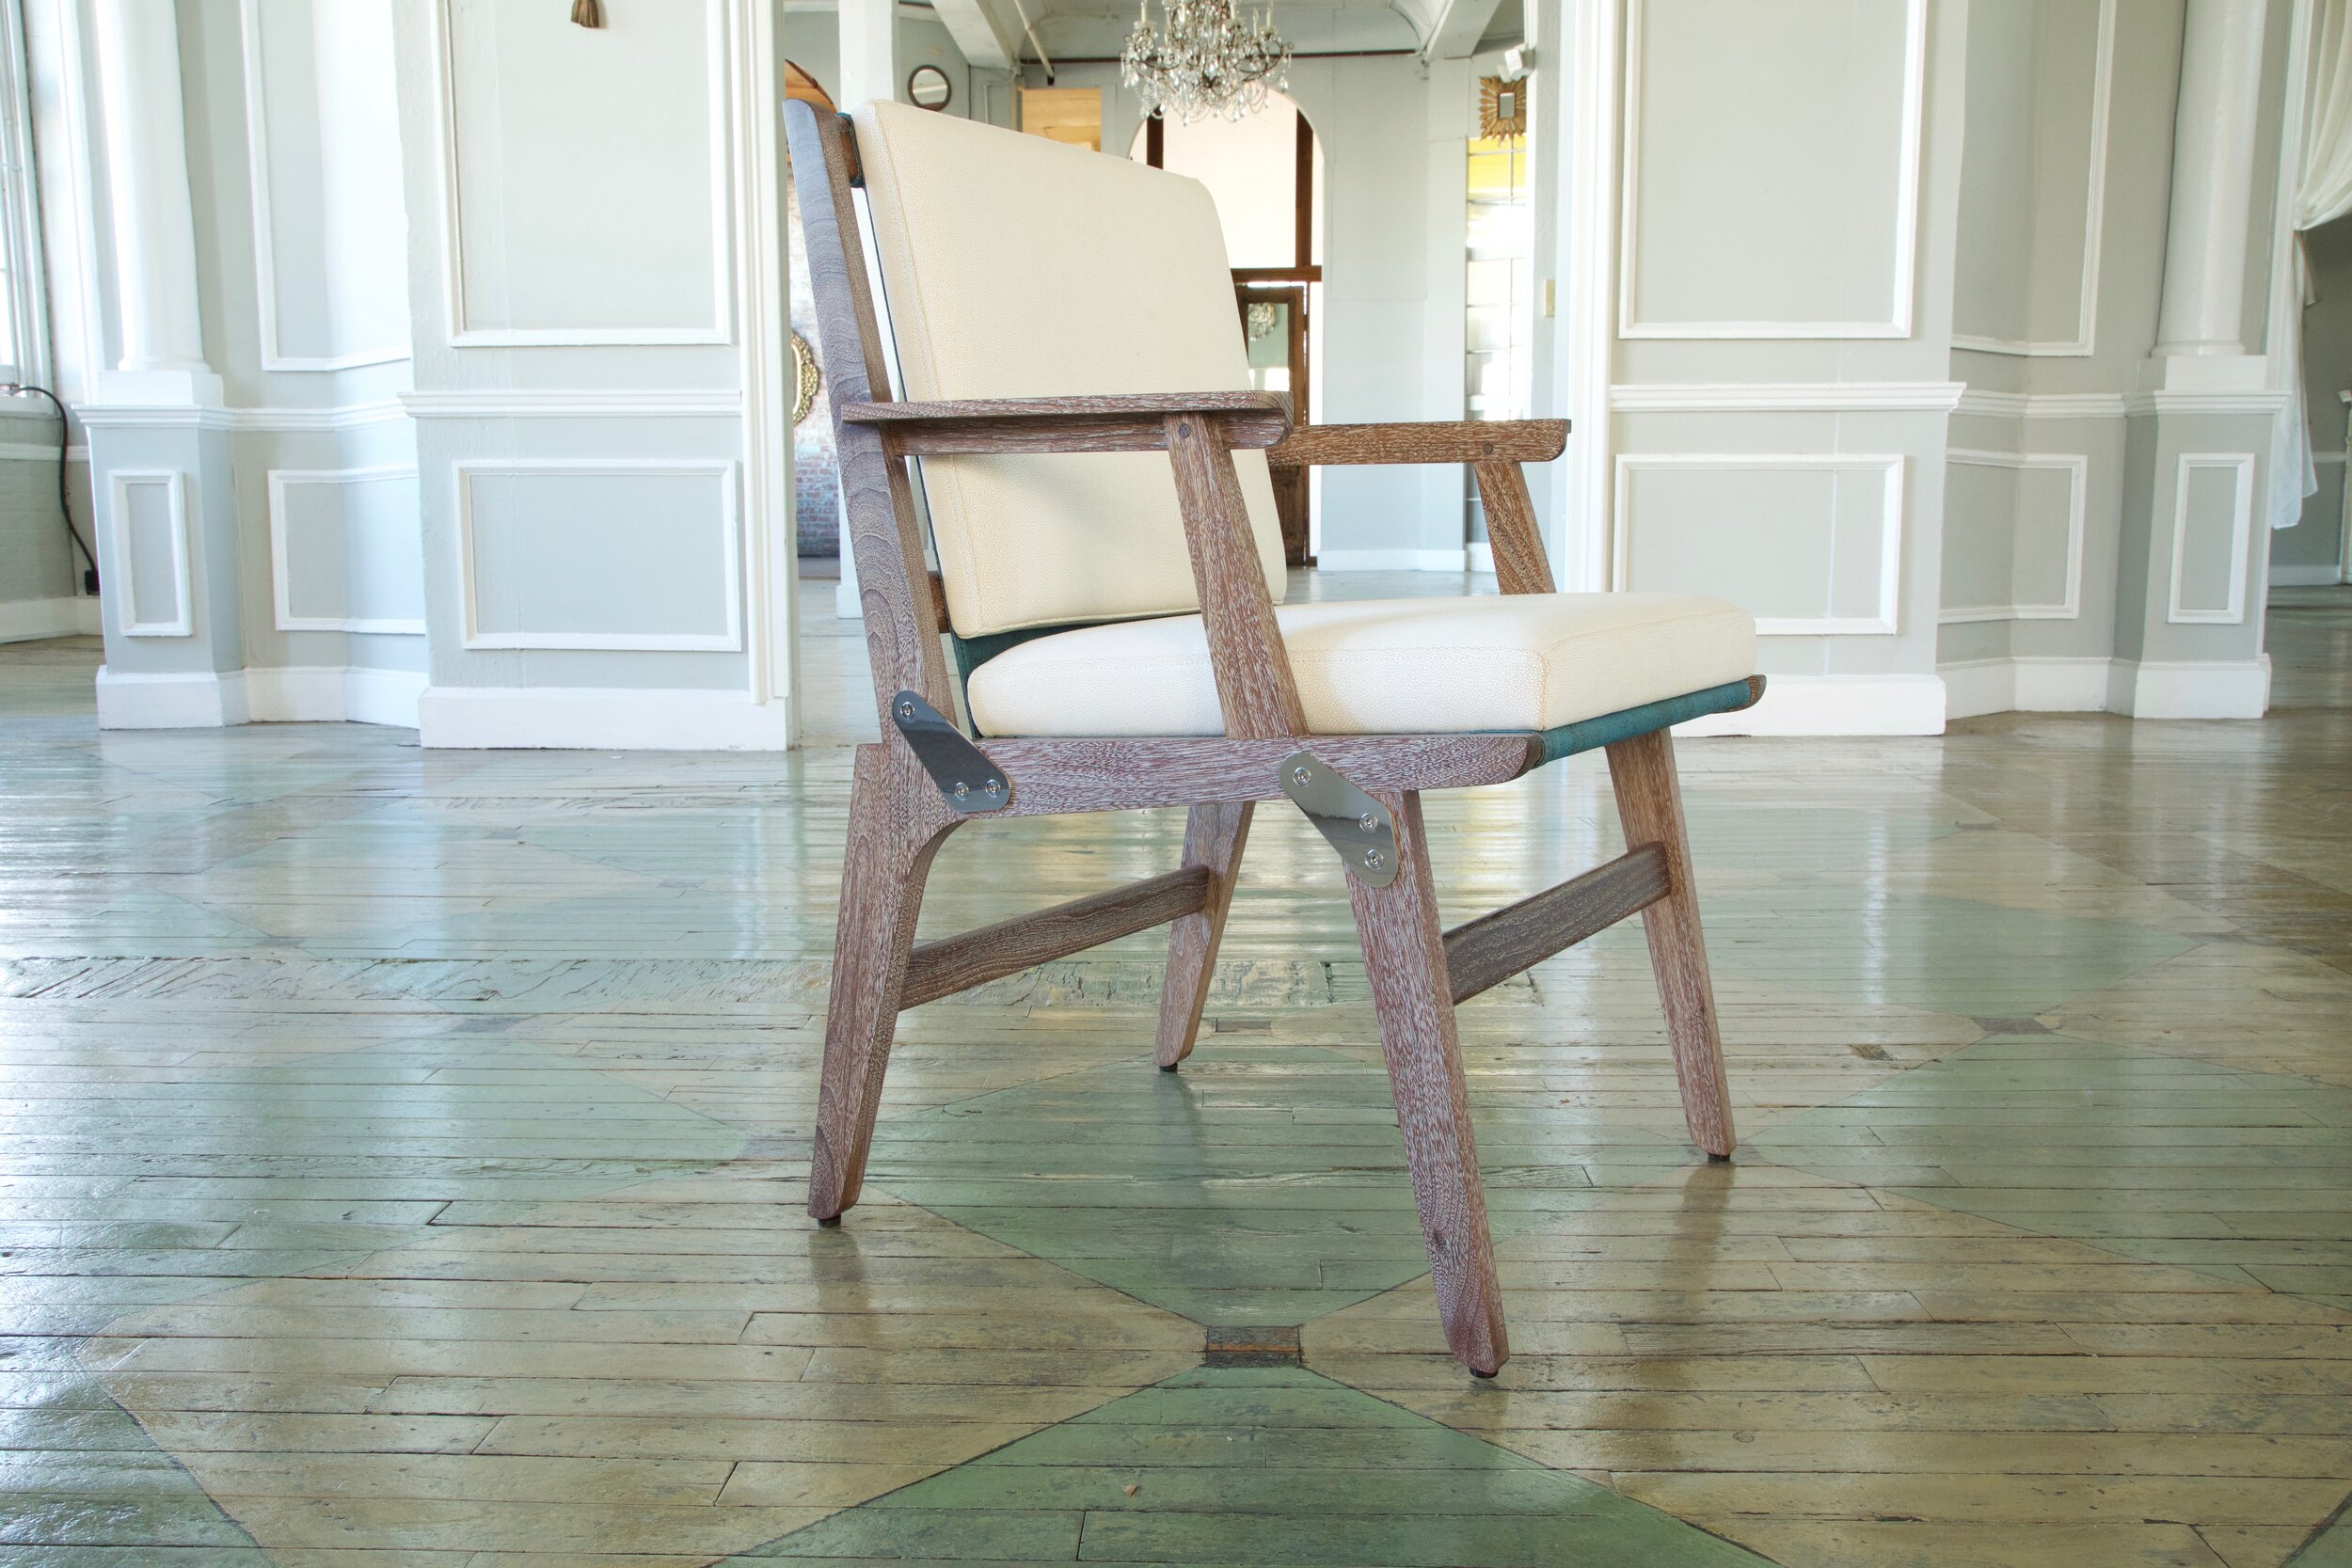 O.F.S. Arm Chair - wide